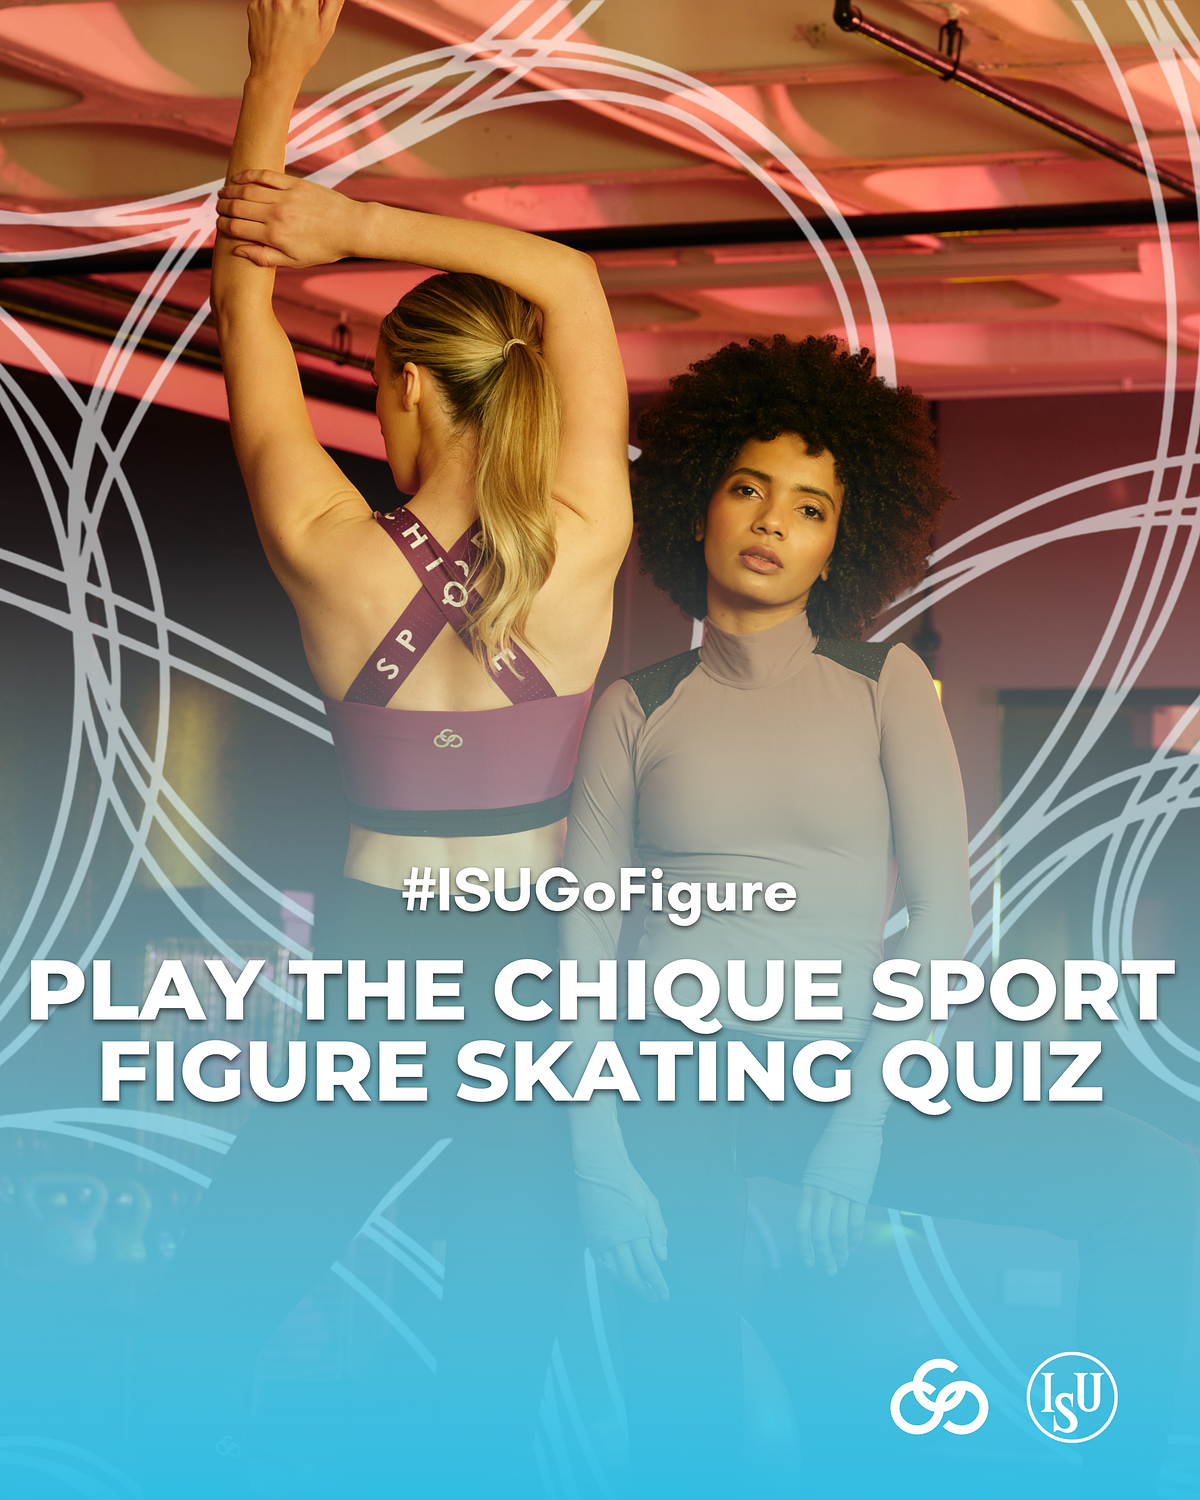 ISUGoFigure Play the #ChiqueSport Figure Skating Quiz and WIN a hotel